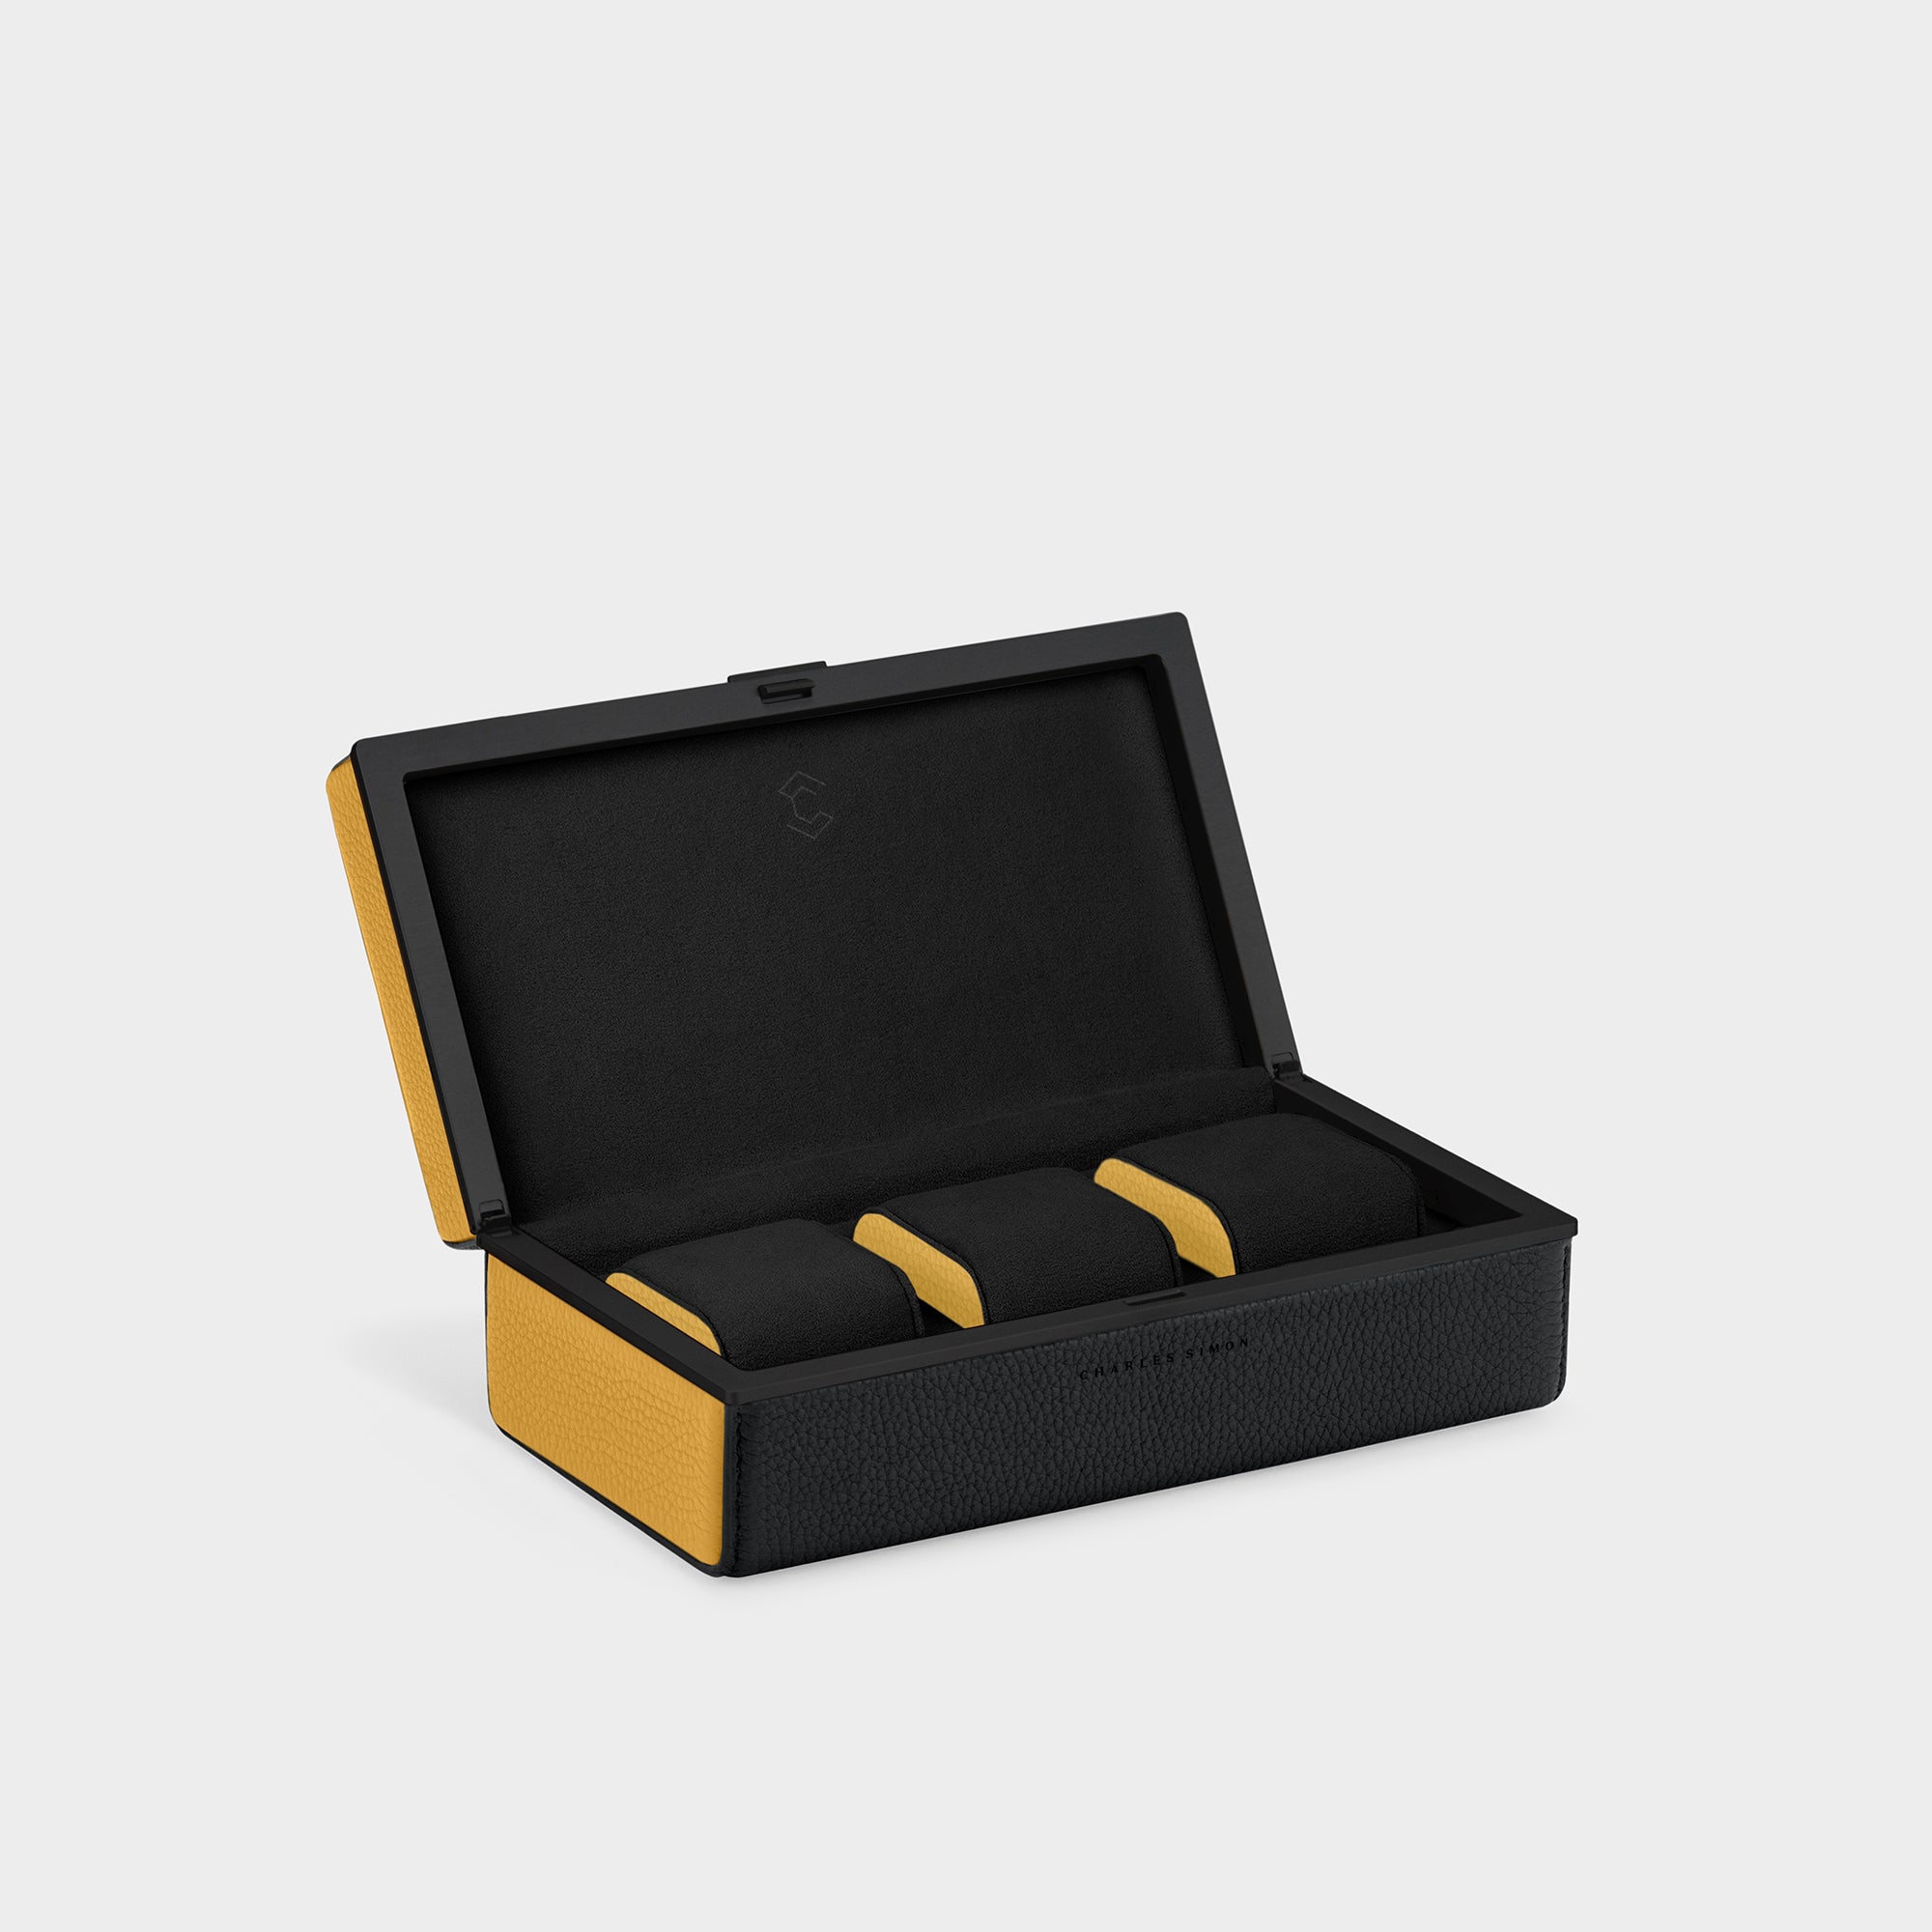 Bold handmade designer watch case for up to 3 watches. Open Eaton 3 by Charles Simon featuring black leather with yellow leather accents, black anodized aluminum and black Alcantara with contrasting yellow leather accents on the cushion sides